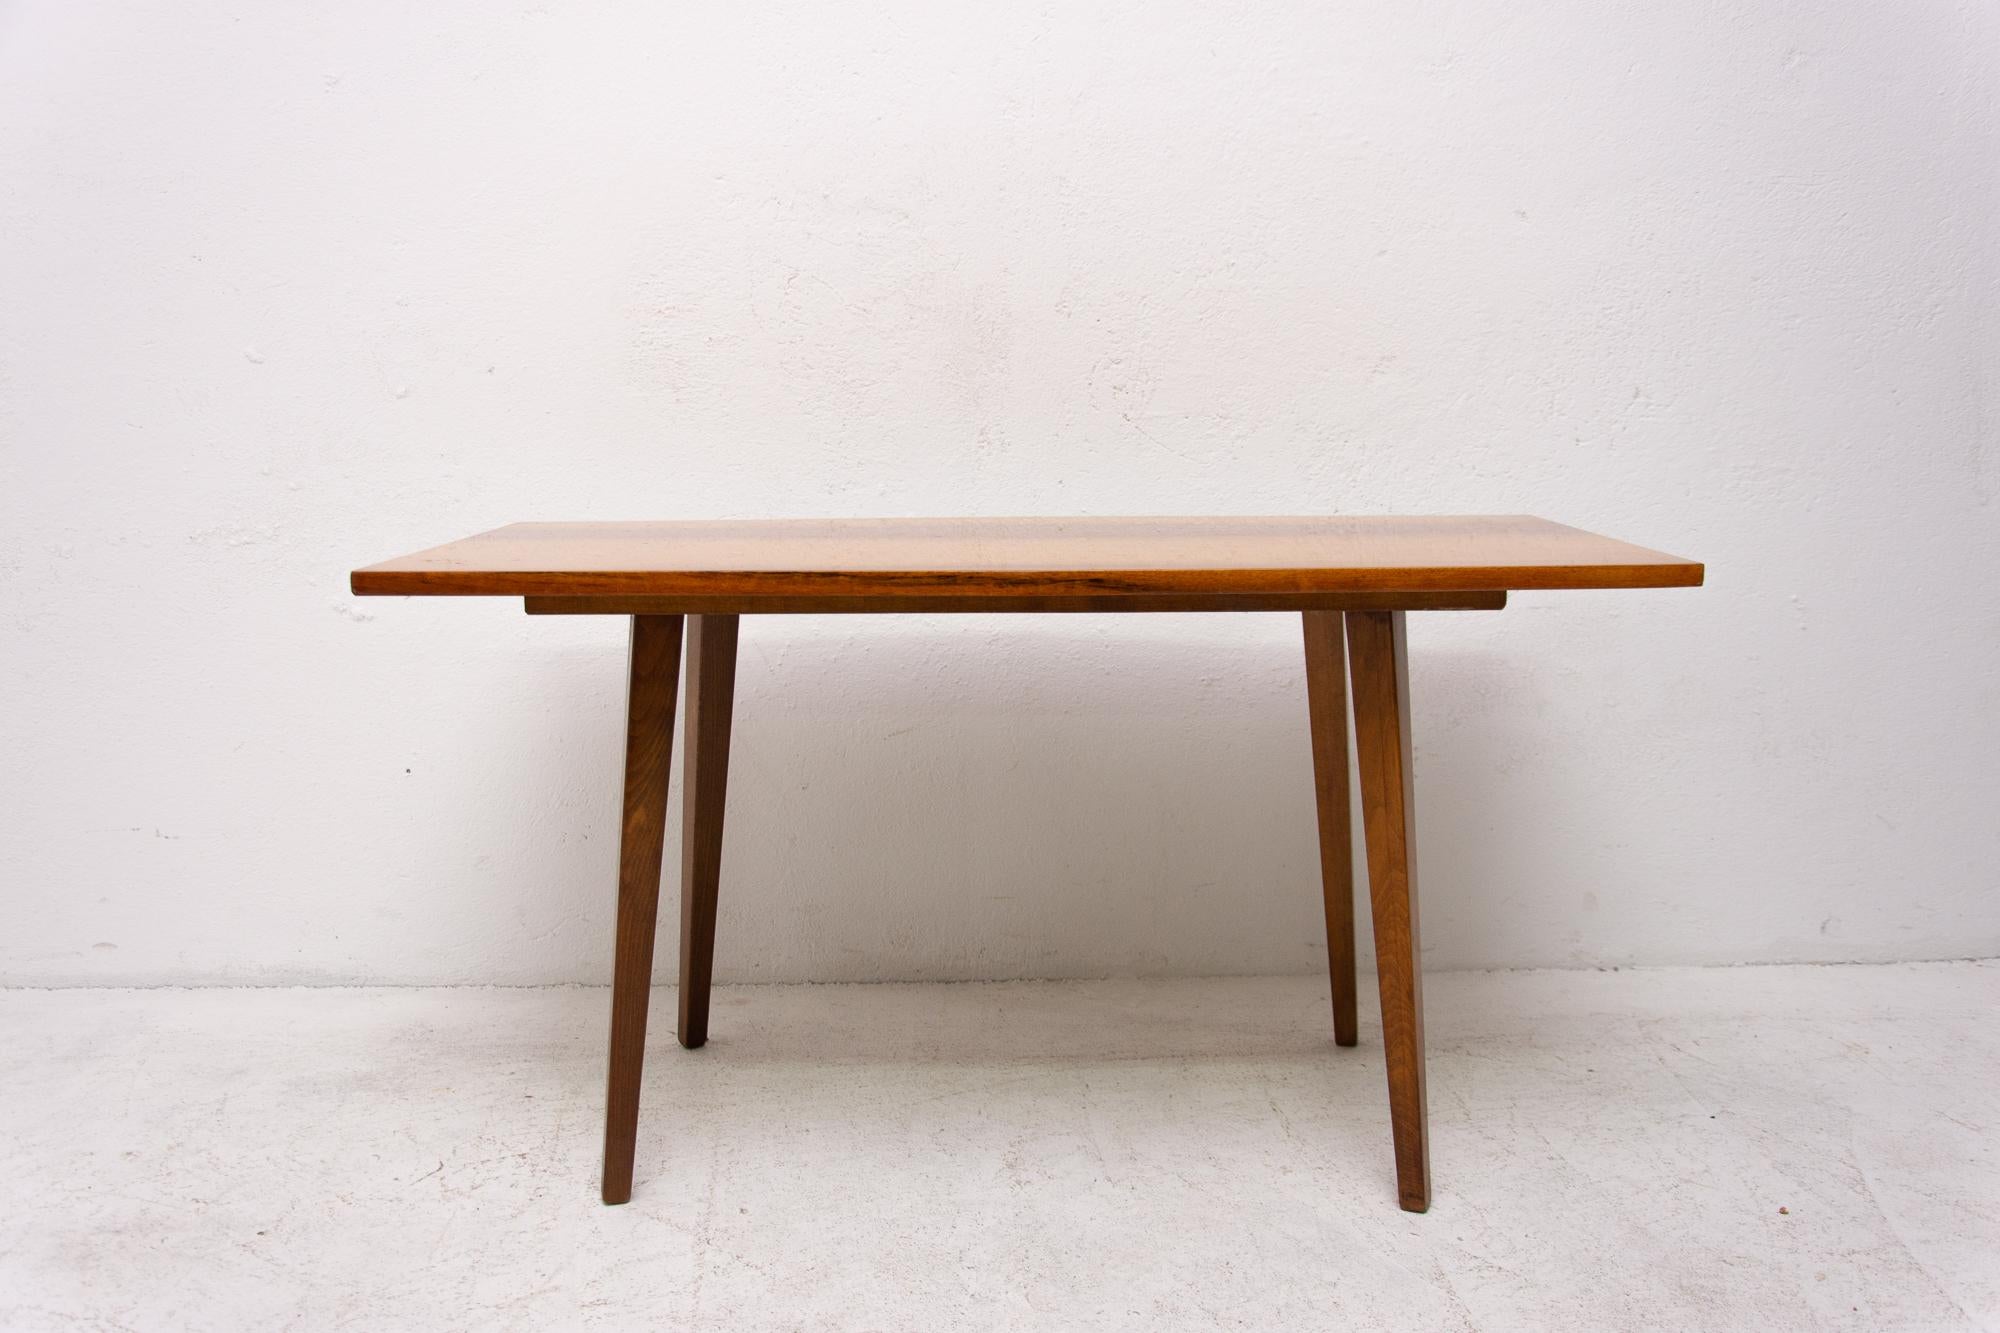 Modern occasional coffee table designed by František Jirák for Tatra nábytok, it was made in the 1960s in the former Czechoslovakia.

Fashioned in wood with walnut veneer. In good vintage condition, there is a minor stain on only one place on the